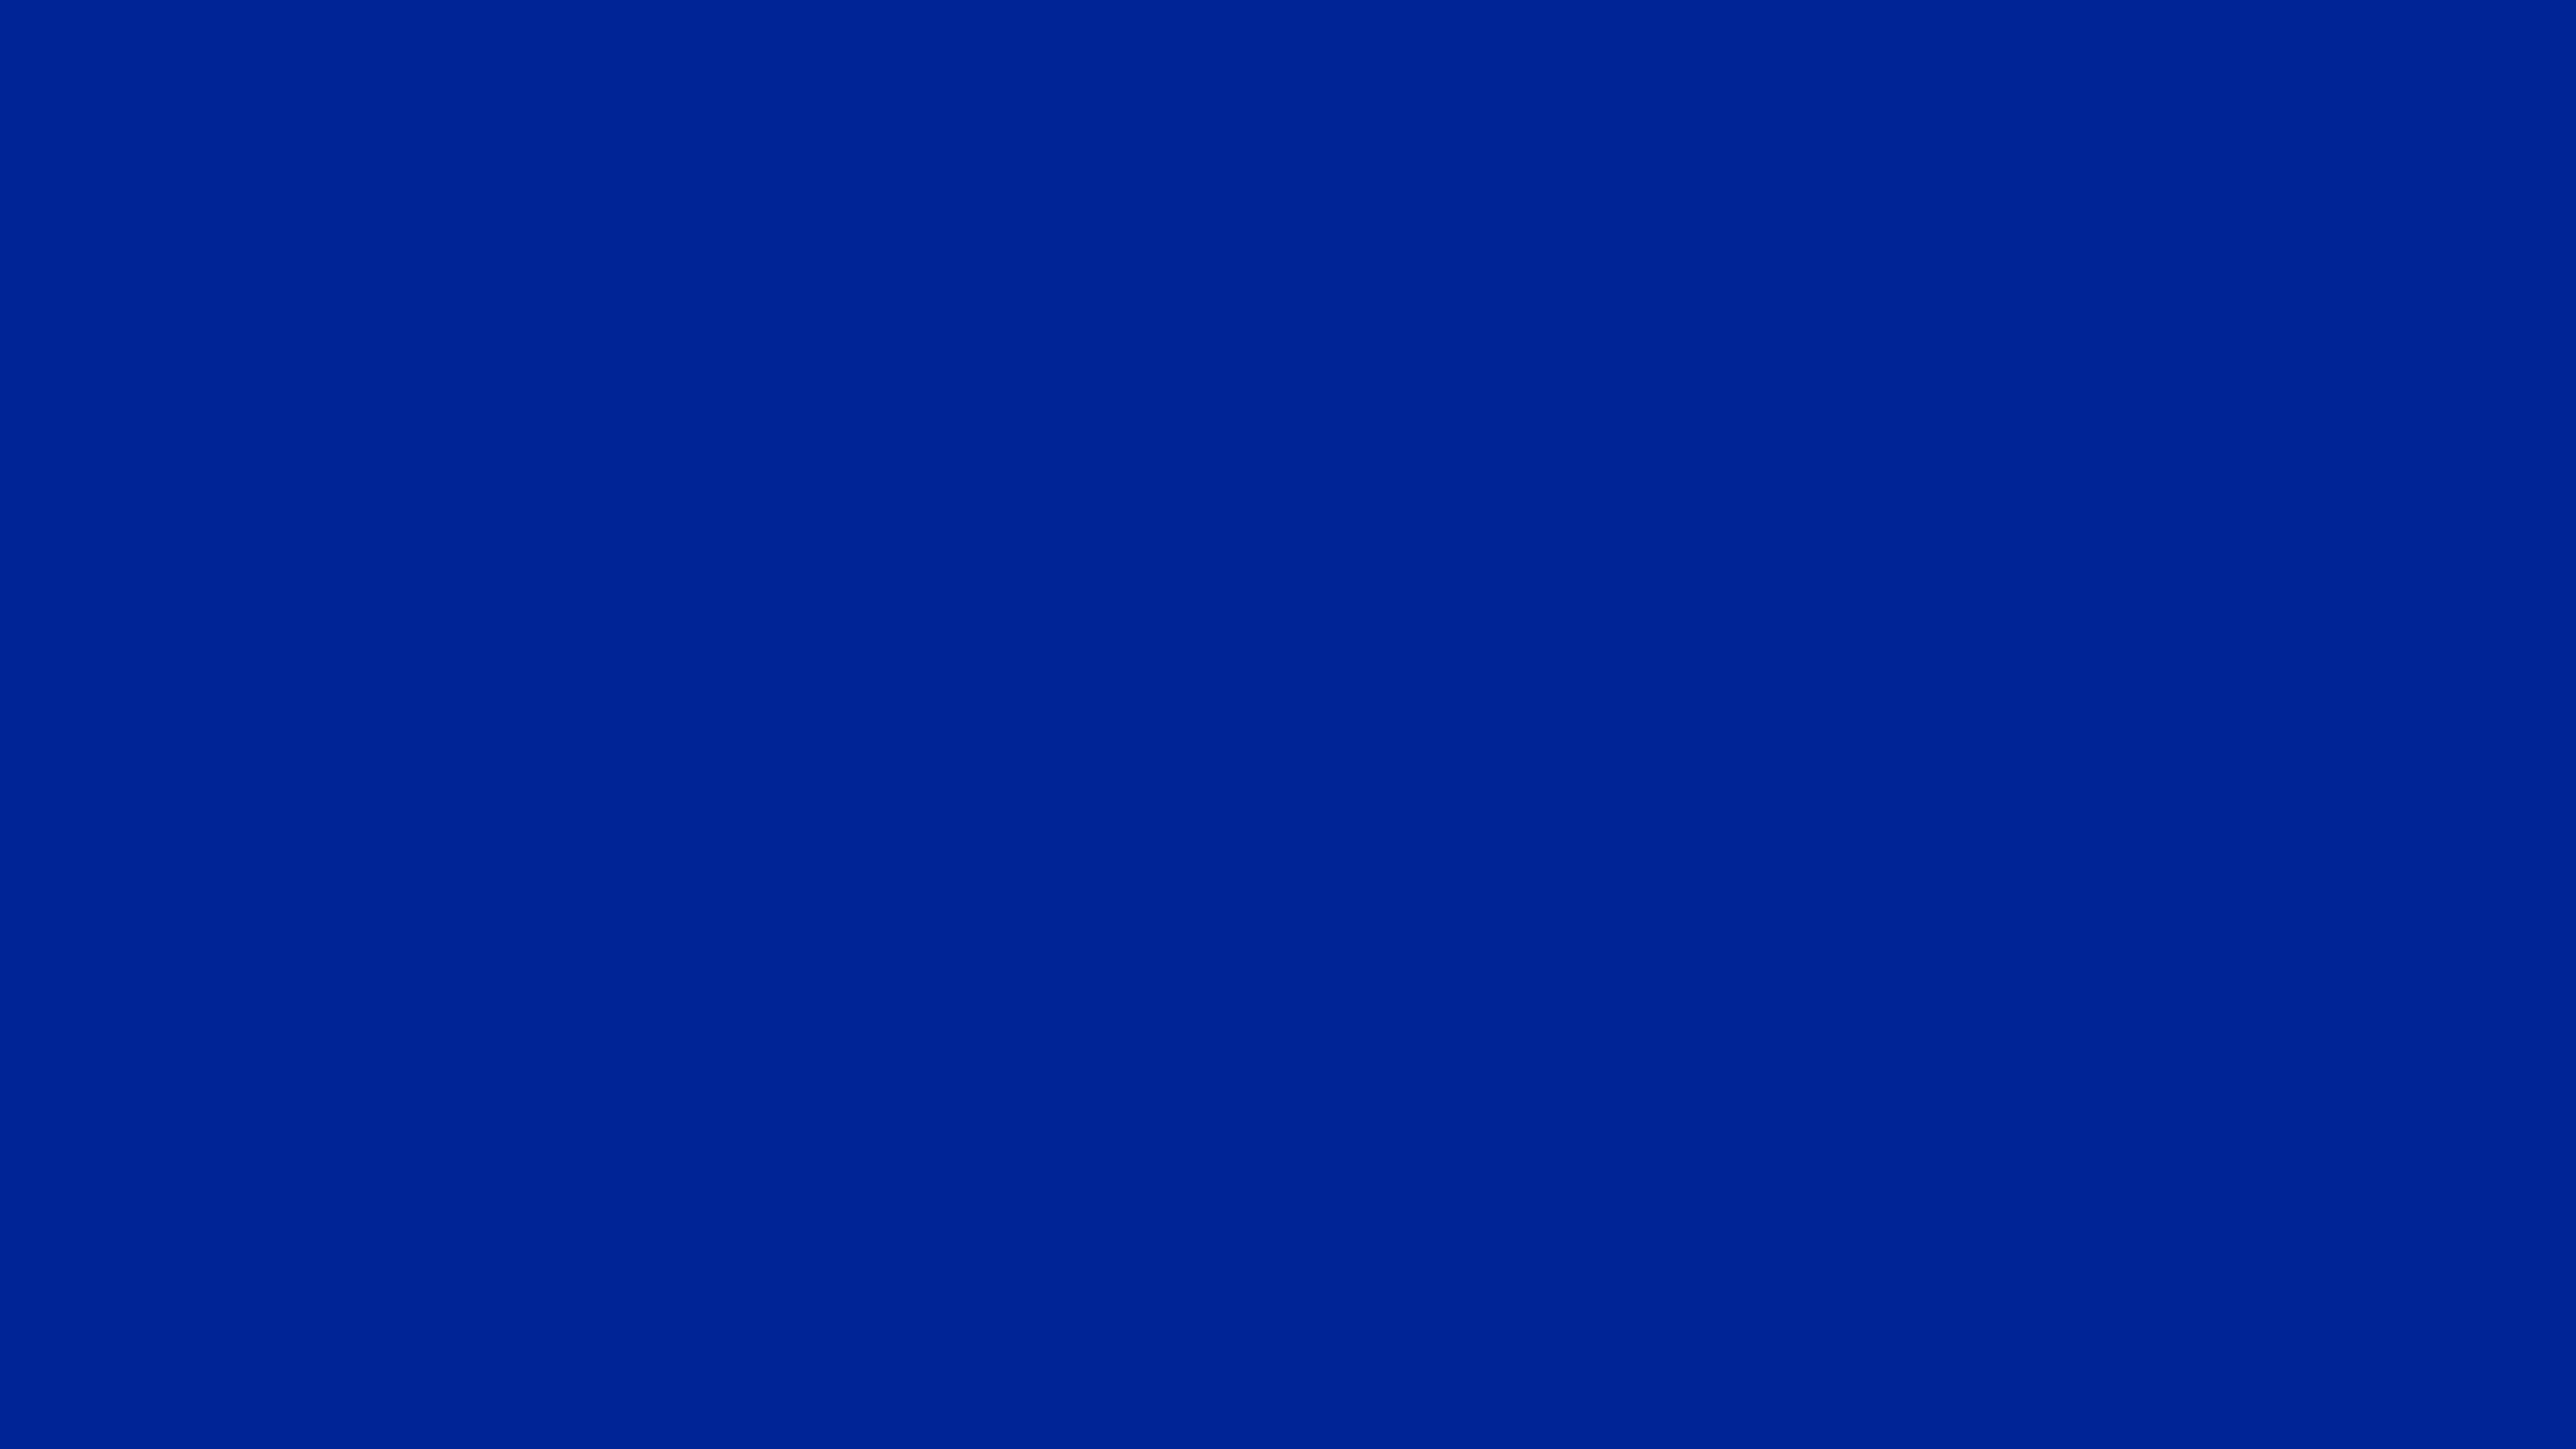 7680x4320 Imperial Blue Solid Color Background